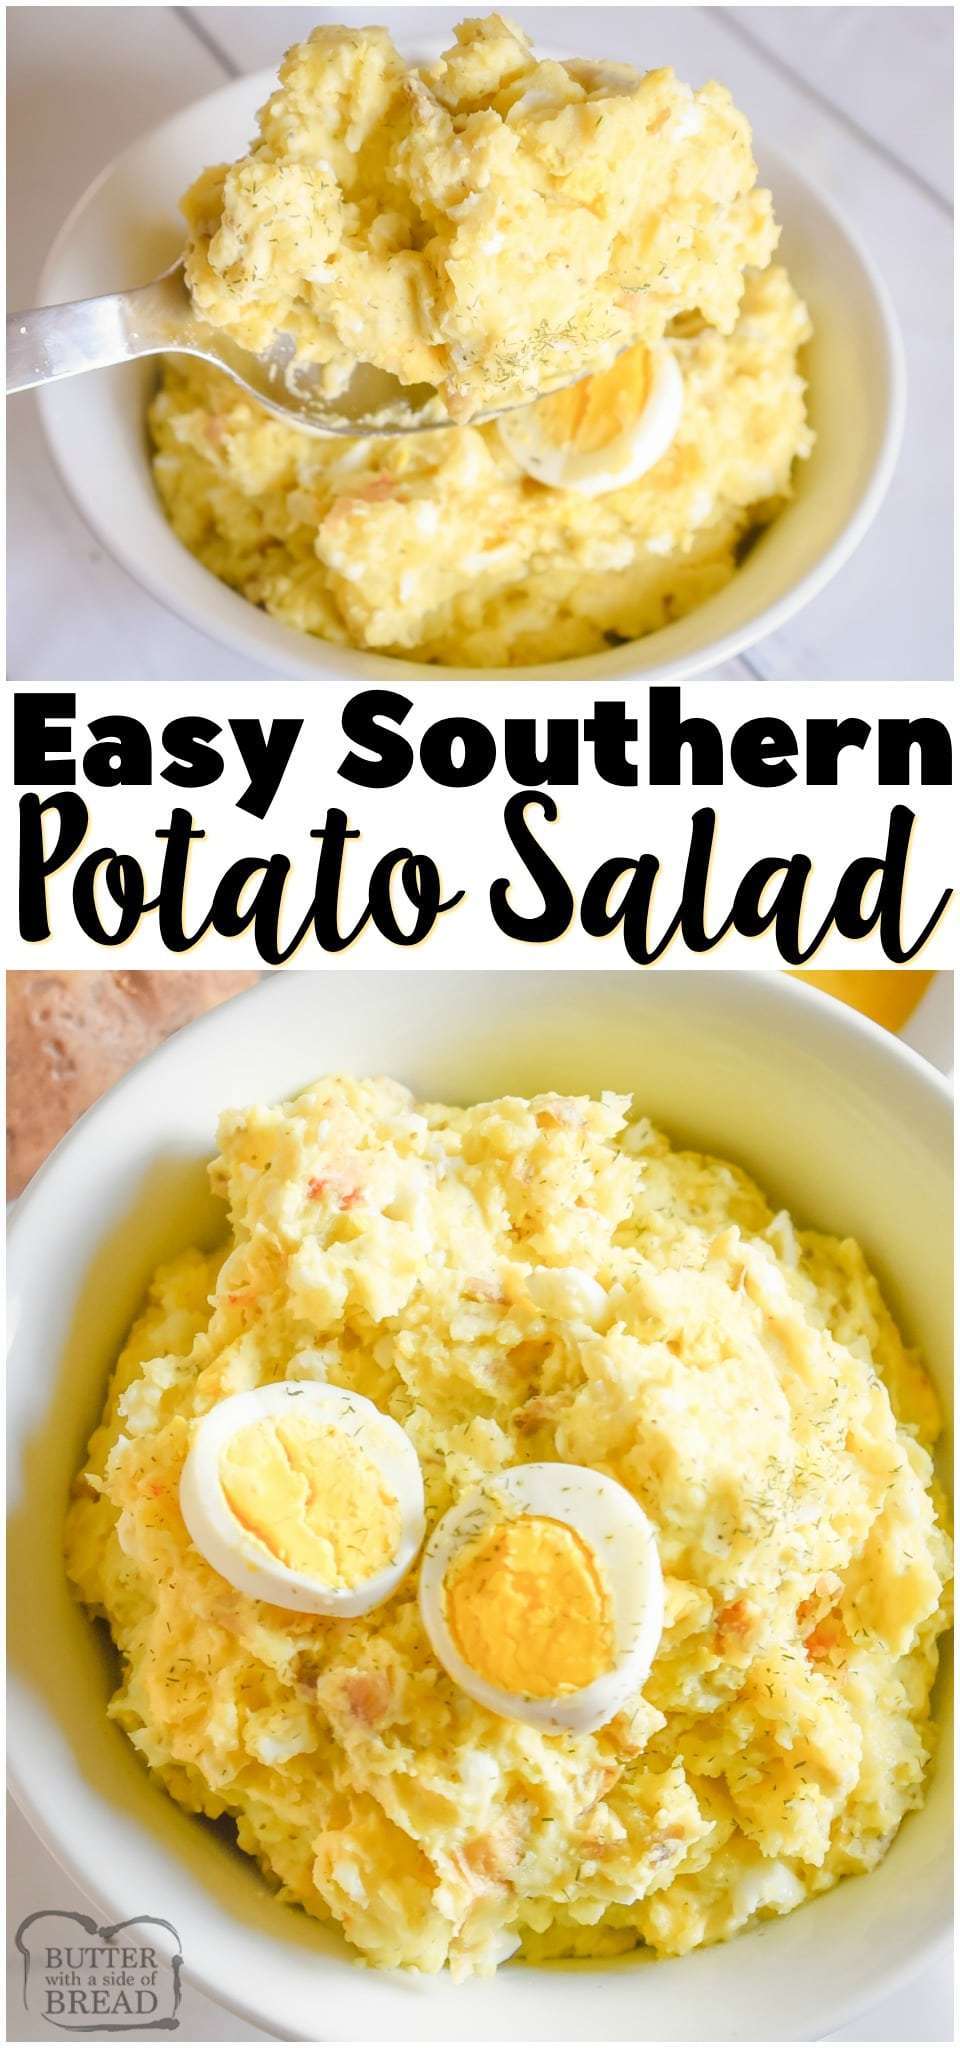 Southern Potato Salad recipe perfect for summer bbq's and get-togethers! Easy potato salad made with Yukon gold potatoes, hard boiled eggs and a simple tangy dressing. 